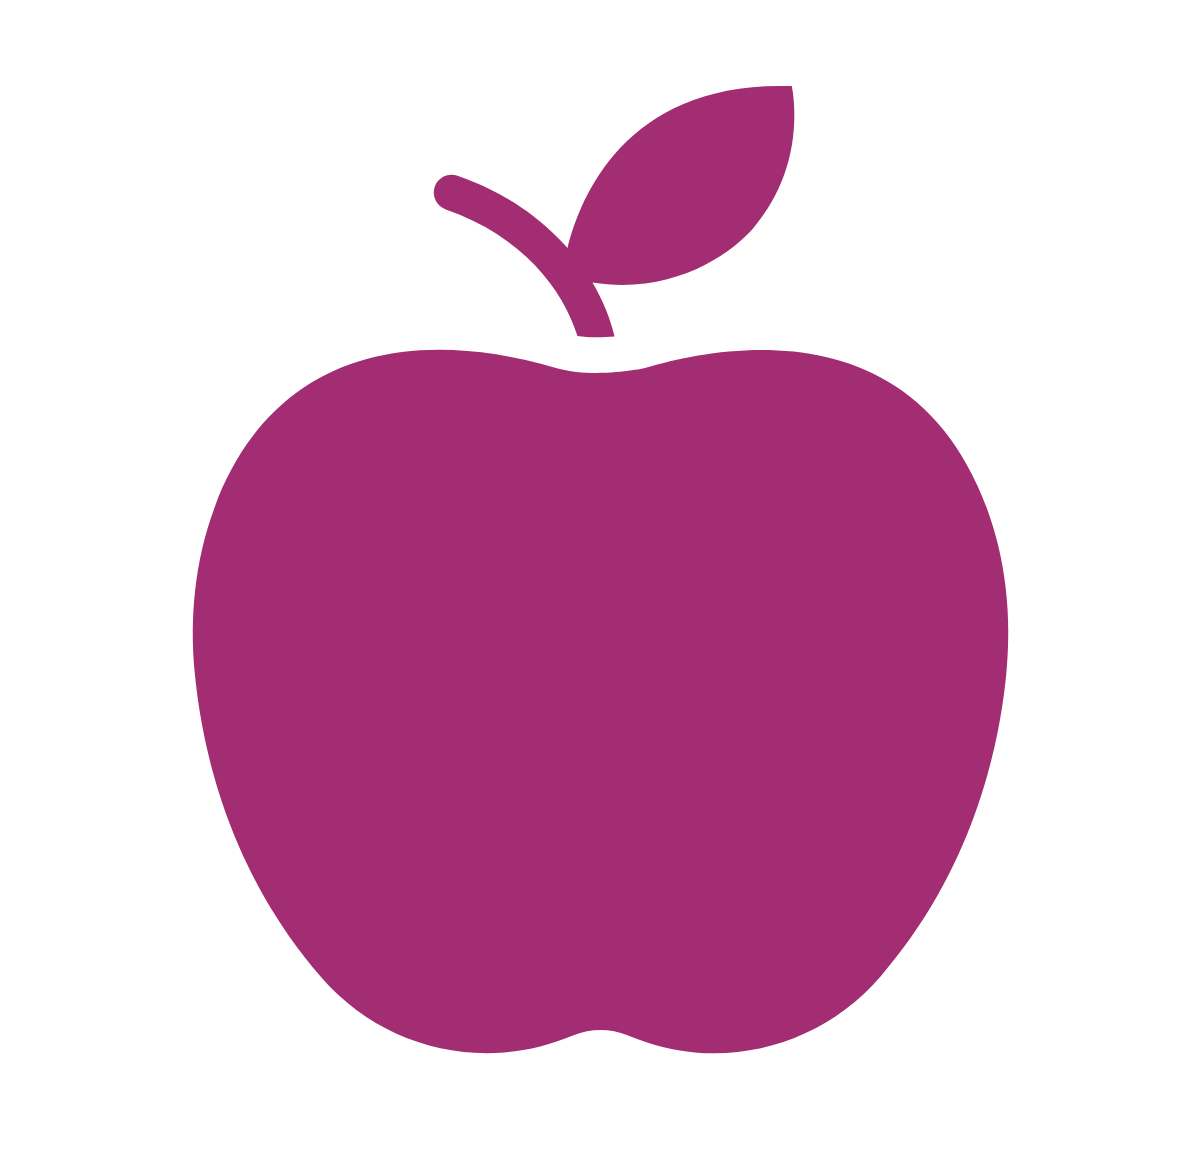 Graphic icon of an apple.